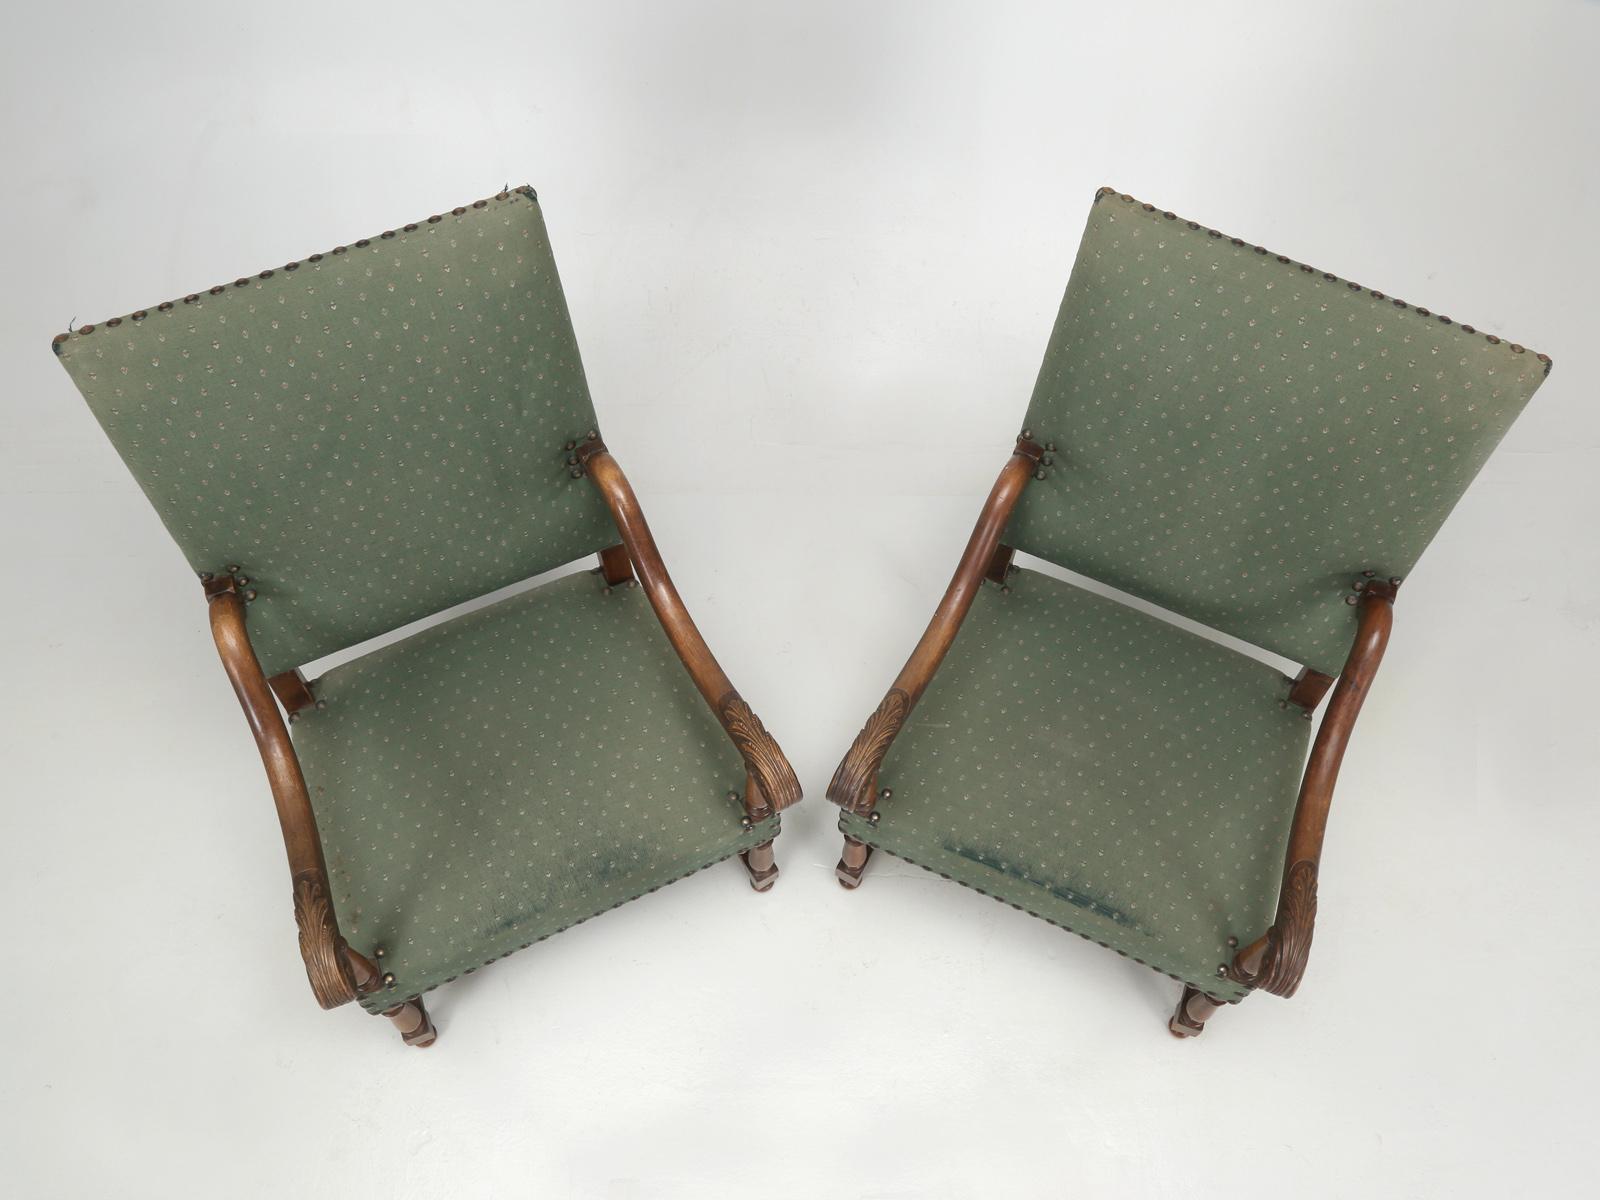 Antique pair of French arm or throne chairs, that we discovered In the Toulouse, France. The French armchairs are being offered in their as found condition, although they are quite usable as they are. We have priced this pair of antique French